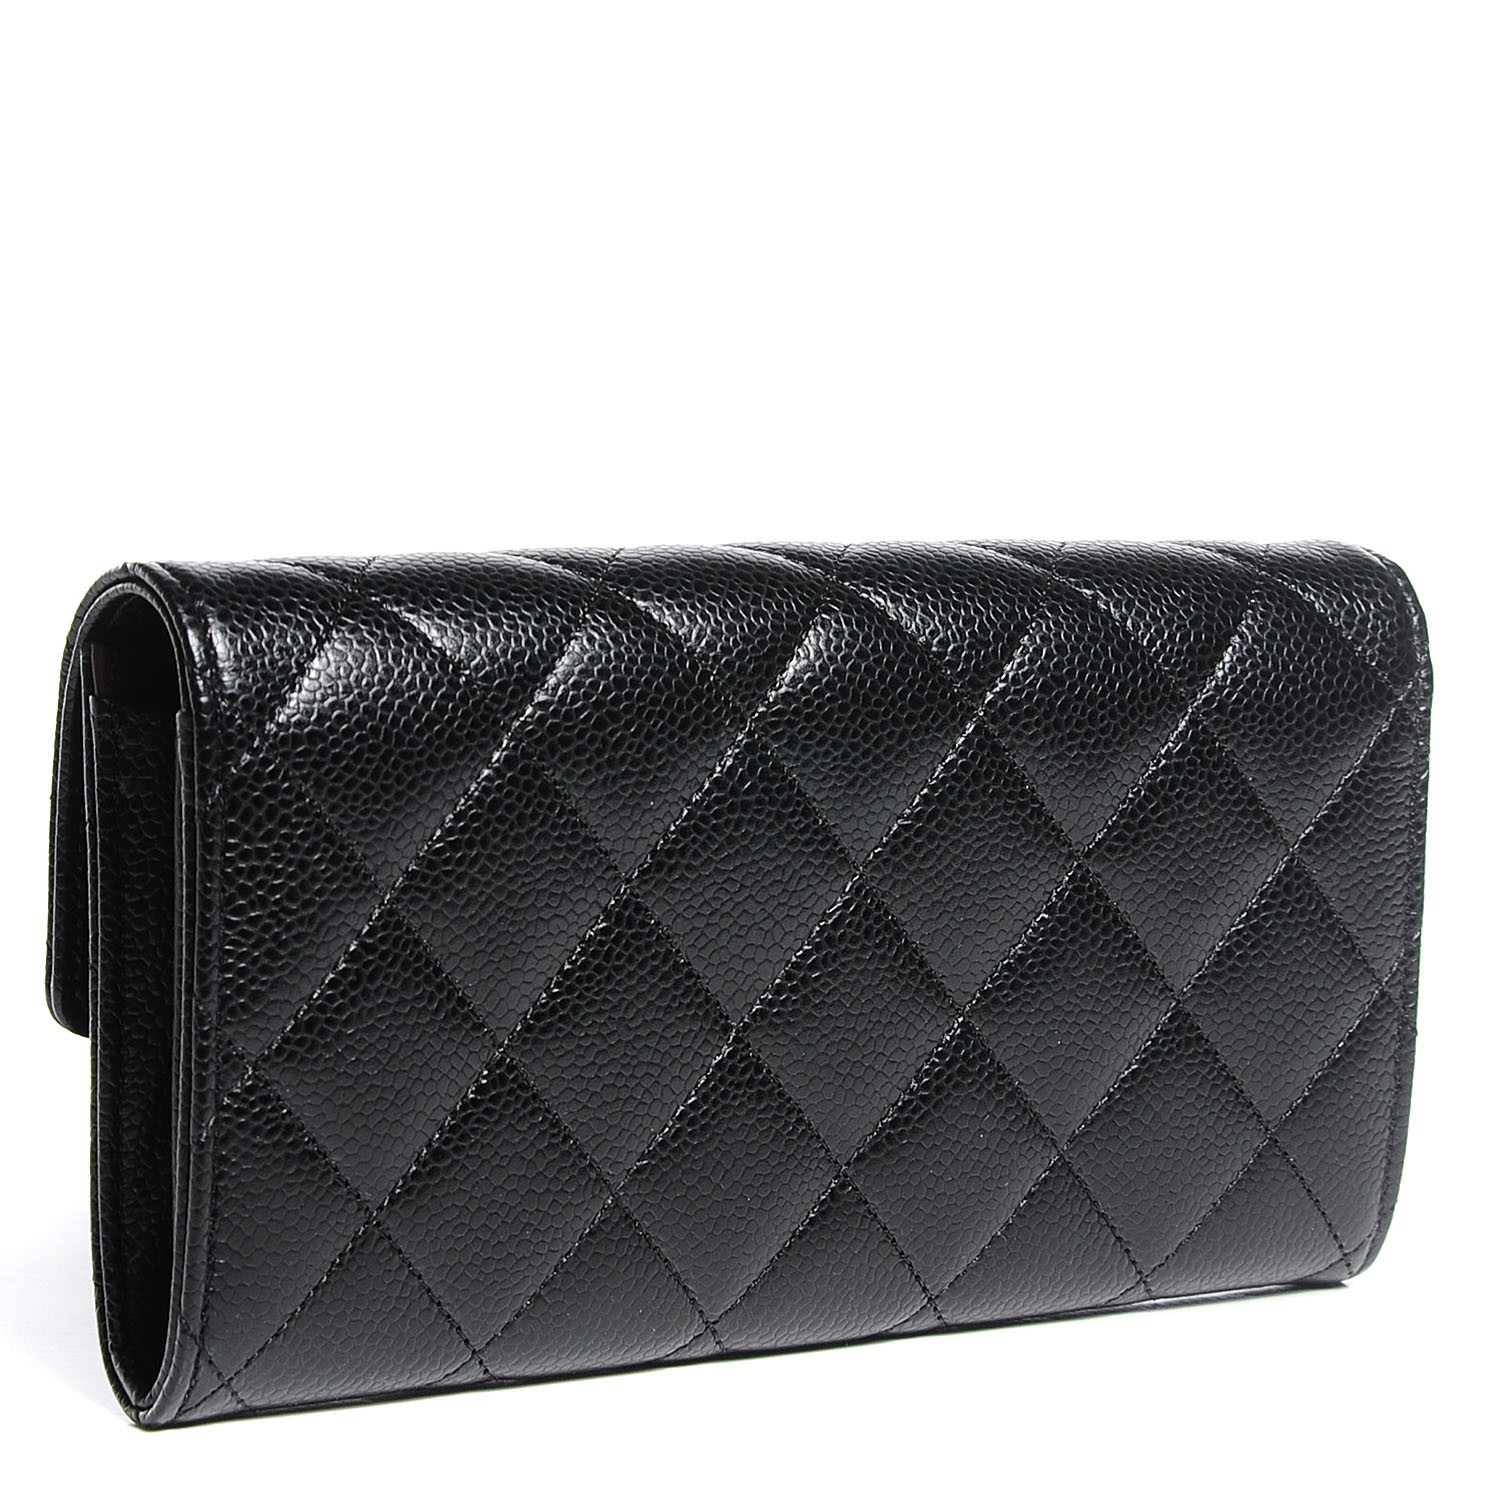 CHANEL Caviar Quilted Large Gusset Flap Wallet Black 109094